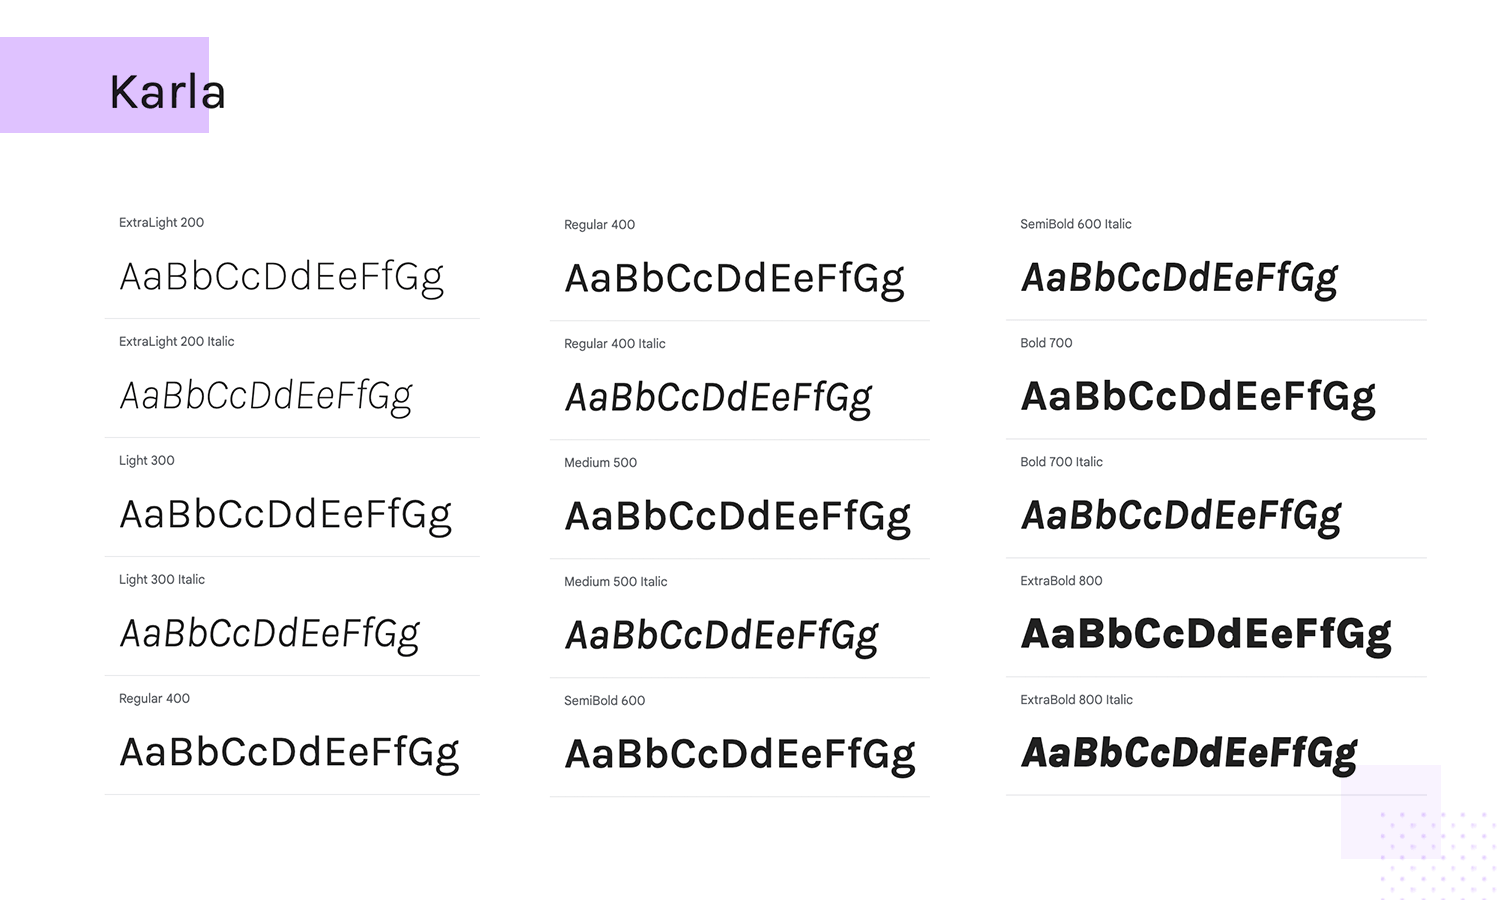 Karla font showcase with weights from ExtraLight 200 to ExtraBold 800, including italics